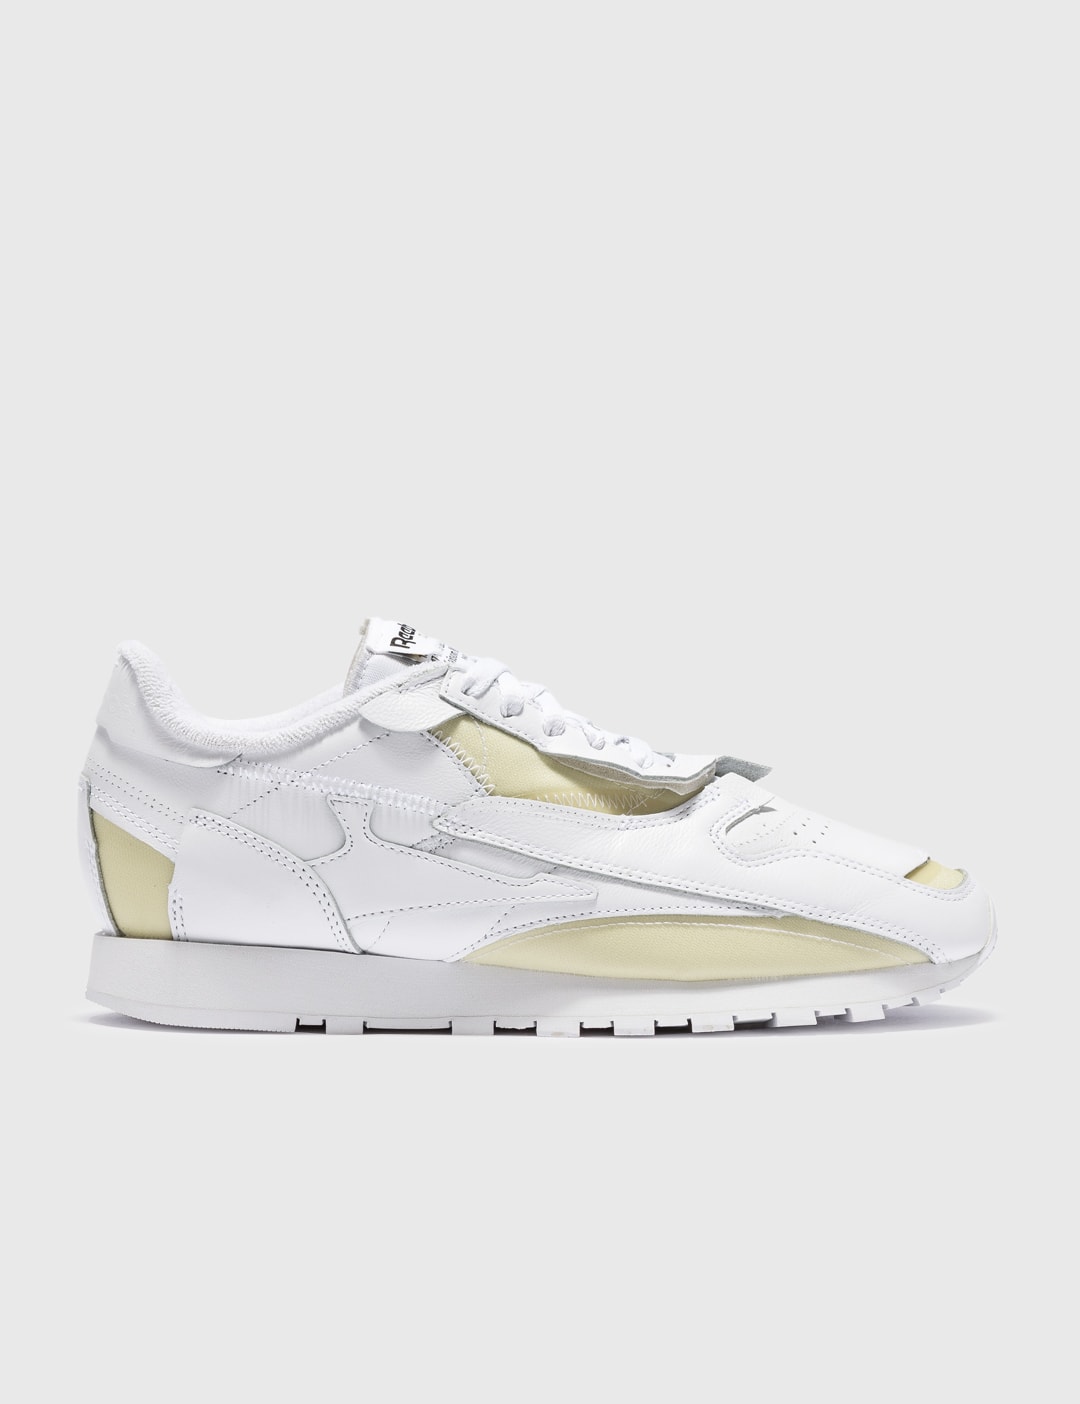 Inwoner Voorloper onaangenaam Maison Margiela - MM x Reebok Classic Leather 'Memory Of' Sneakers | HBX -  Globally Curated Fashion and Lifestyle by Hypebeast